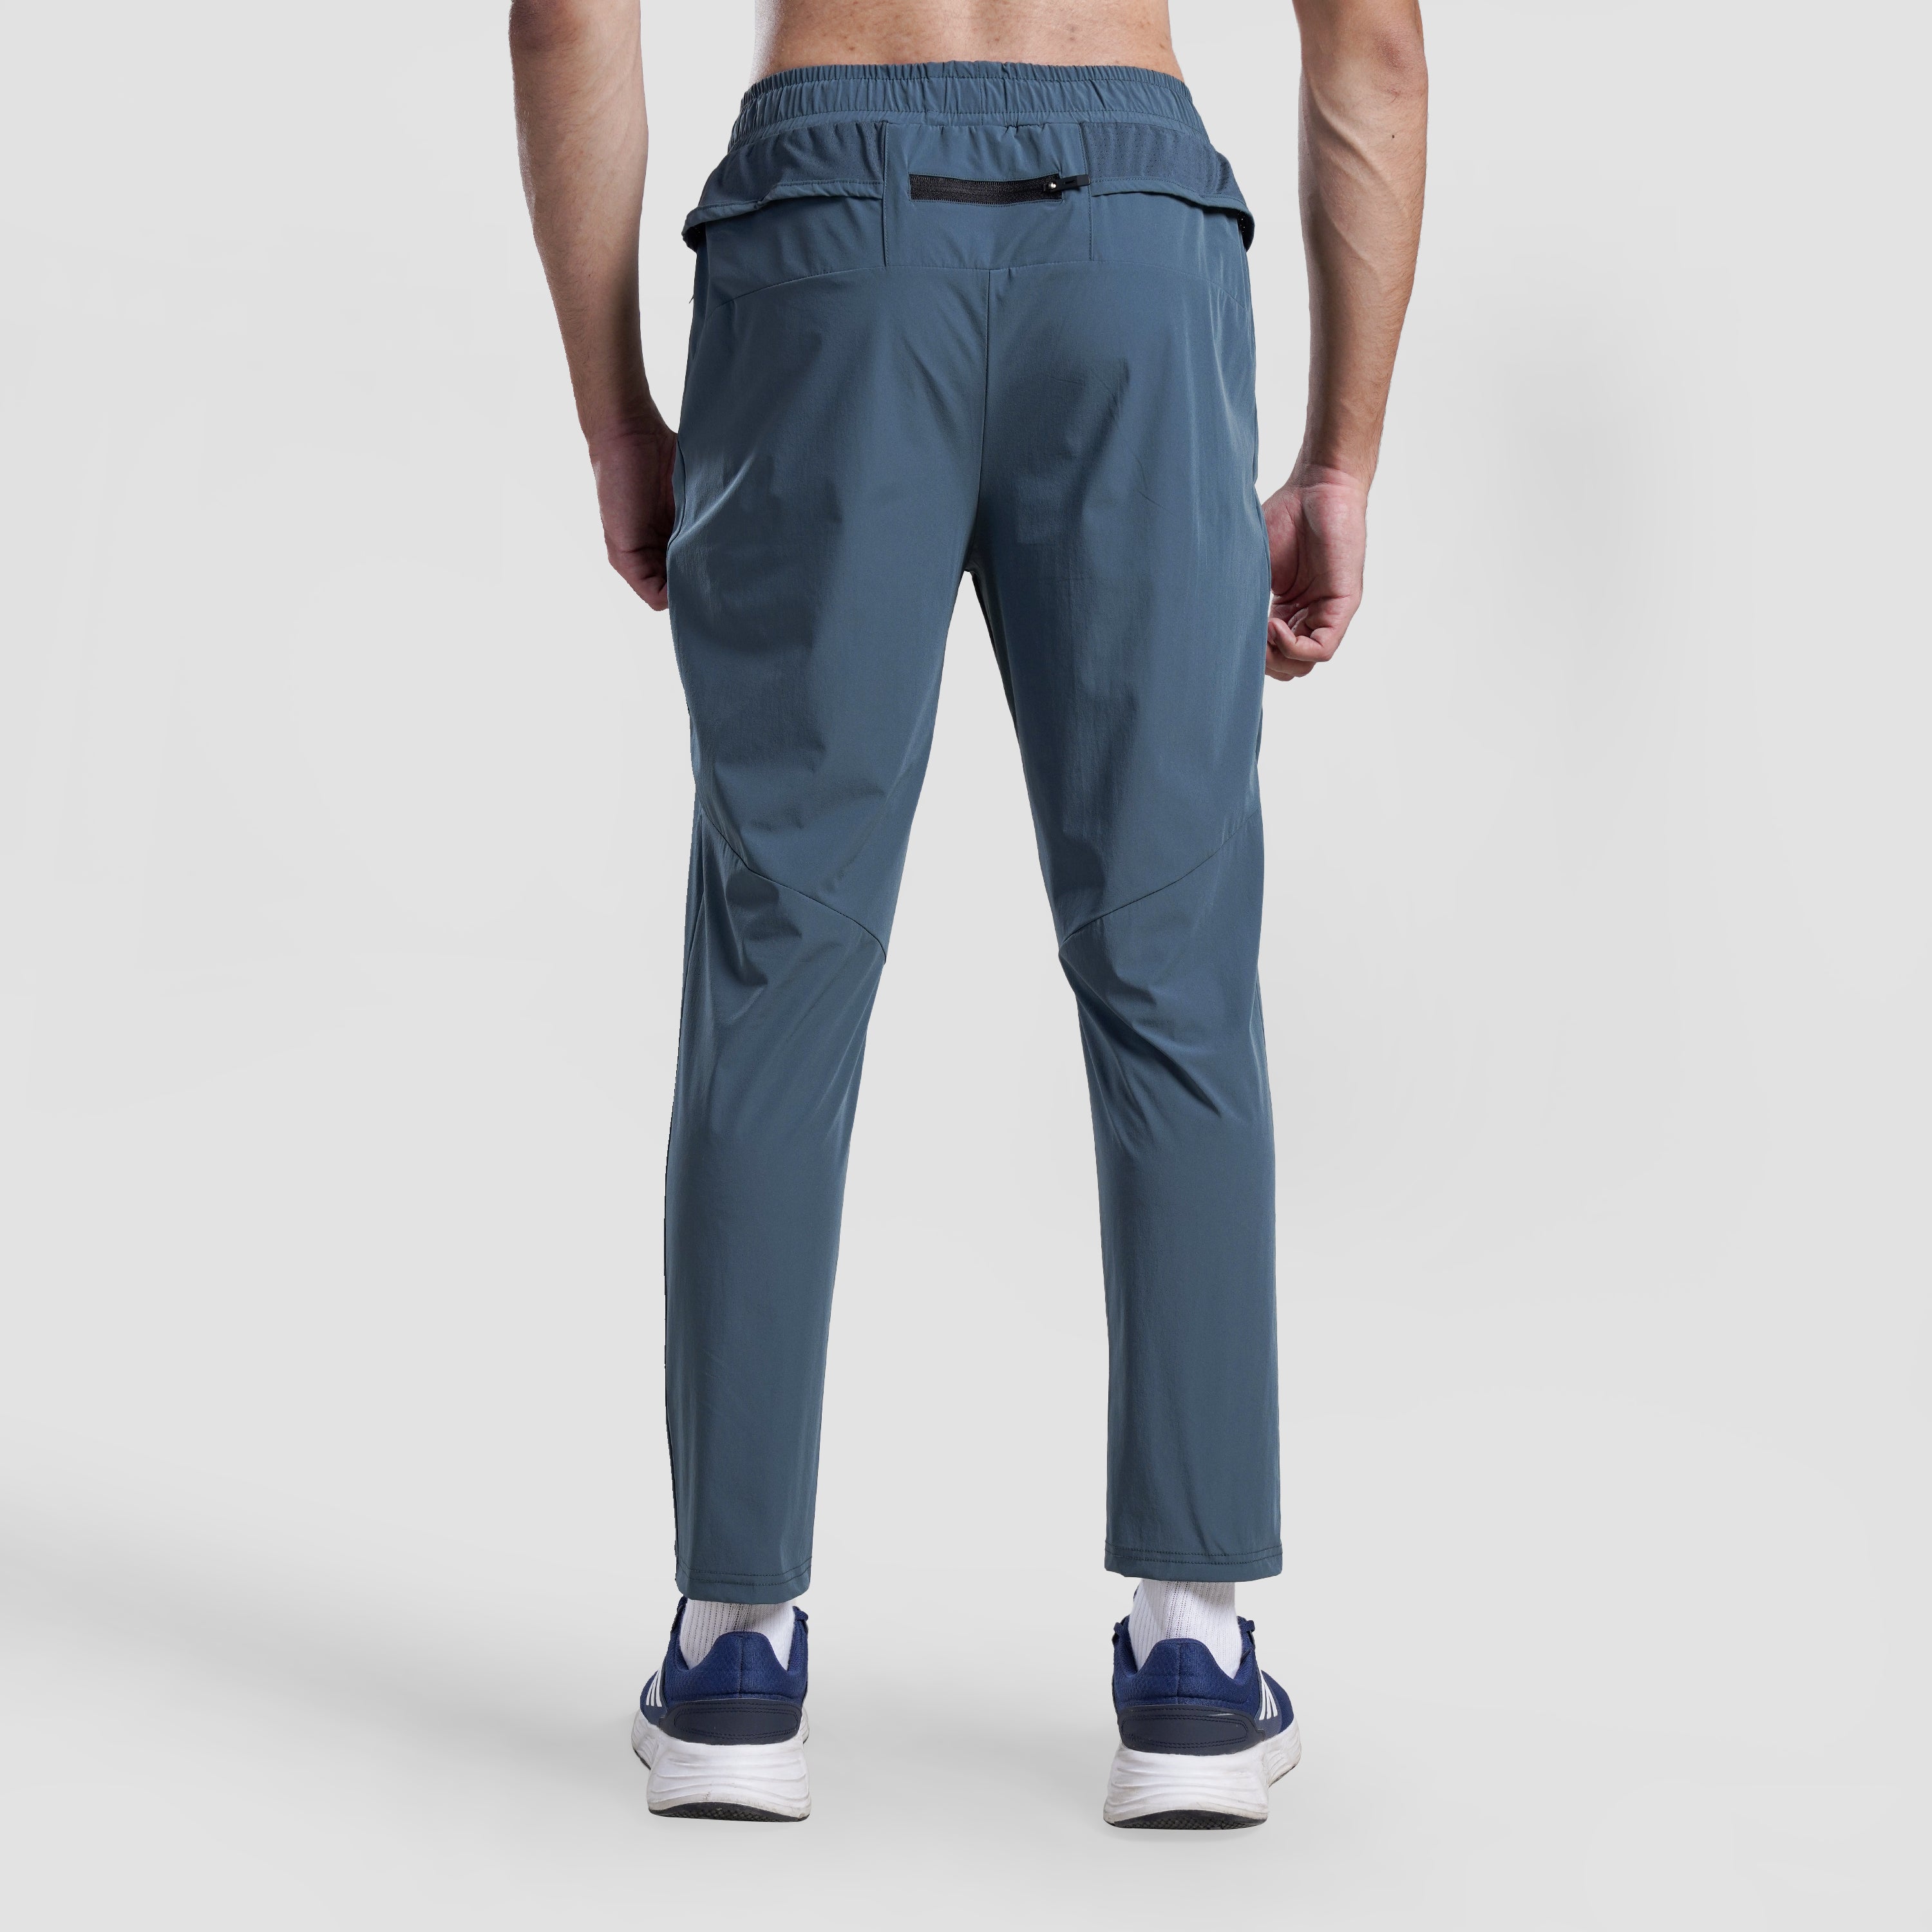 Agility Track Trousers (Grey)